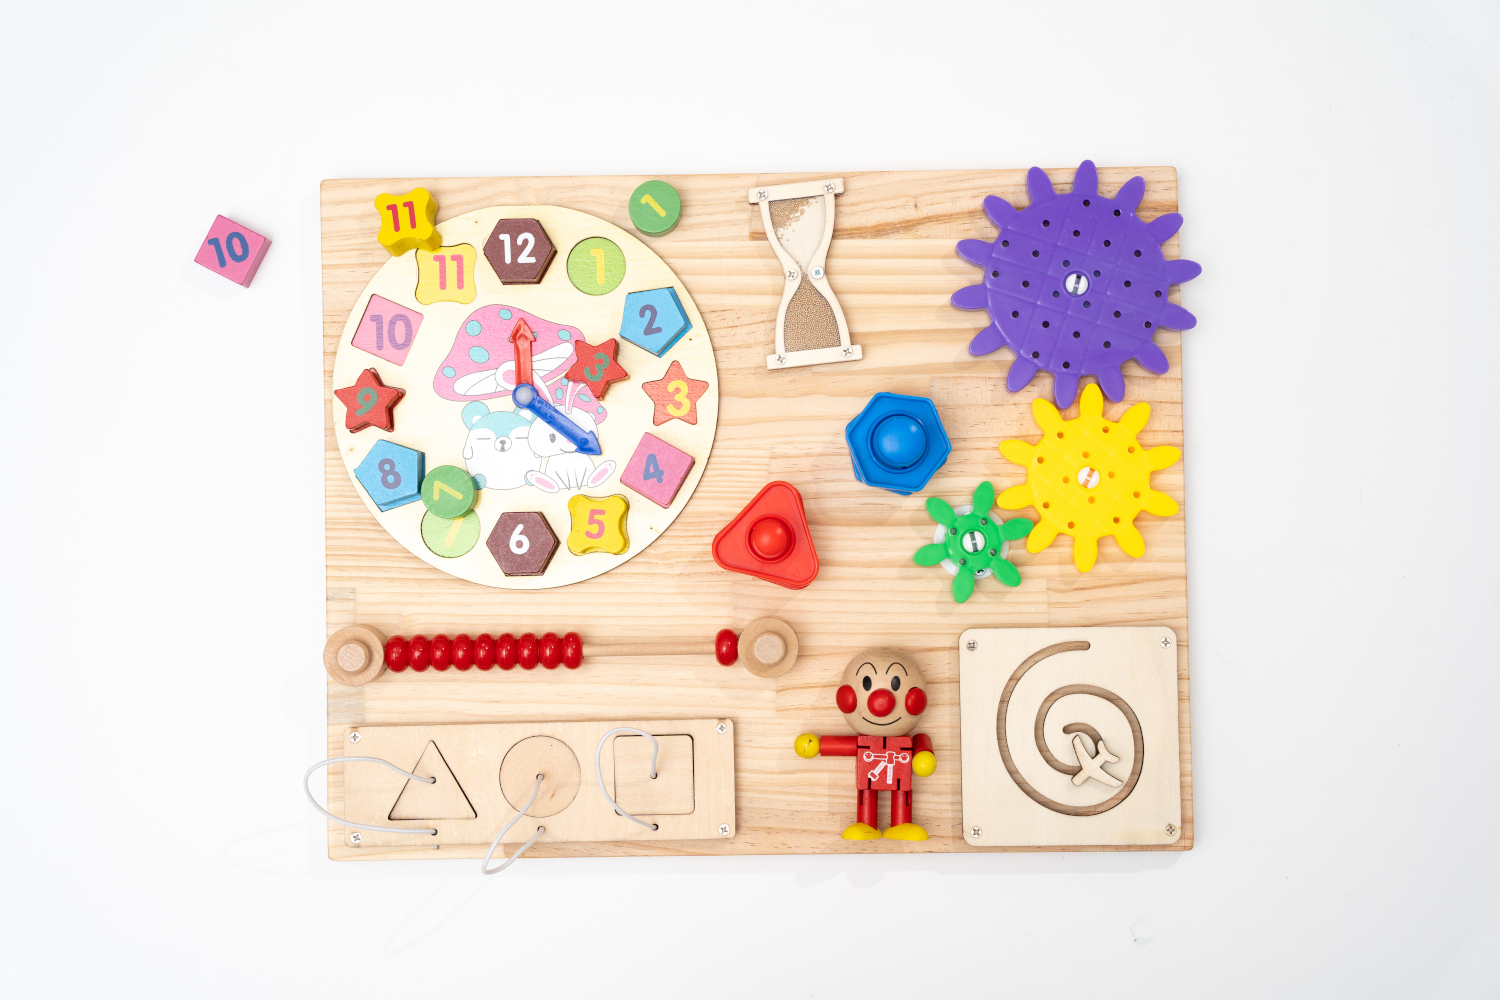 Baby-Wooden-Busy-Board-Activity-Montessori-Learning-Toy-Sensory-Toddler.jpg